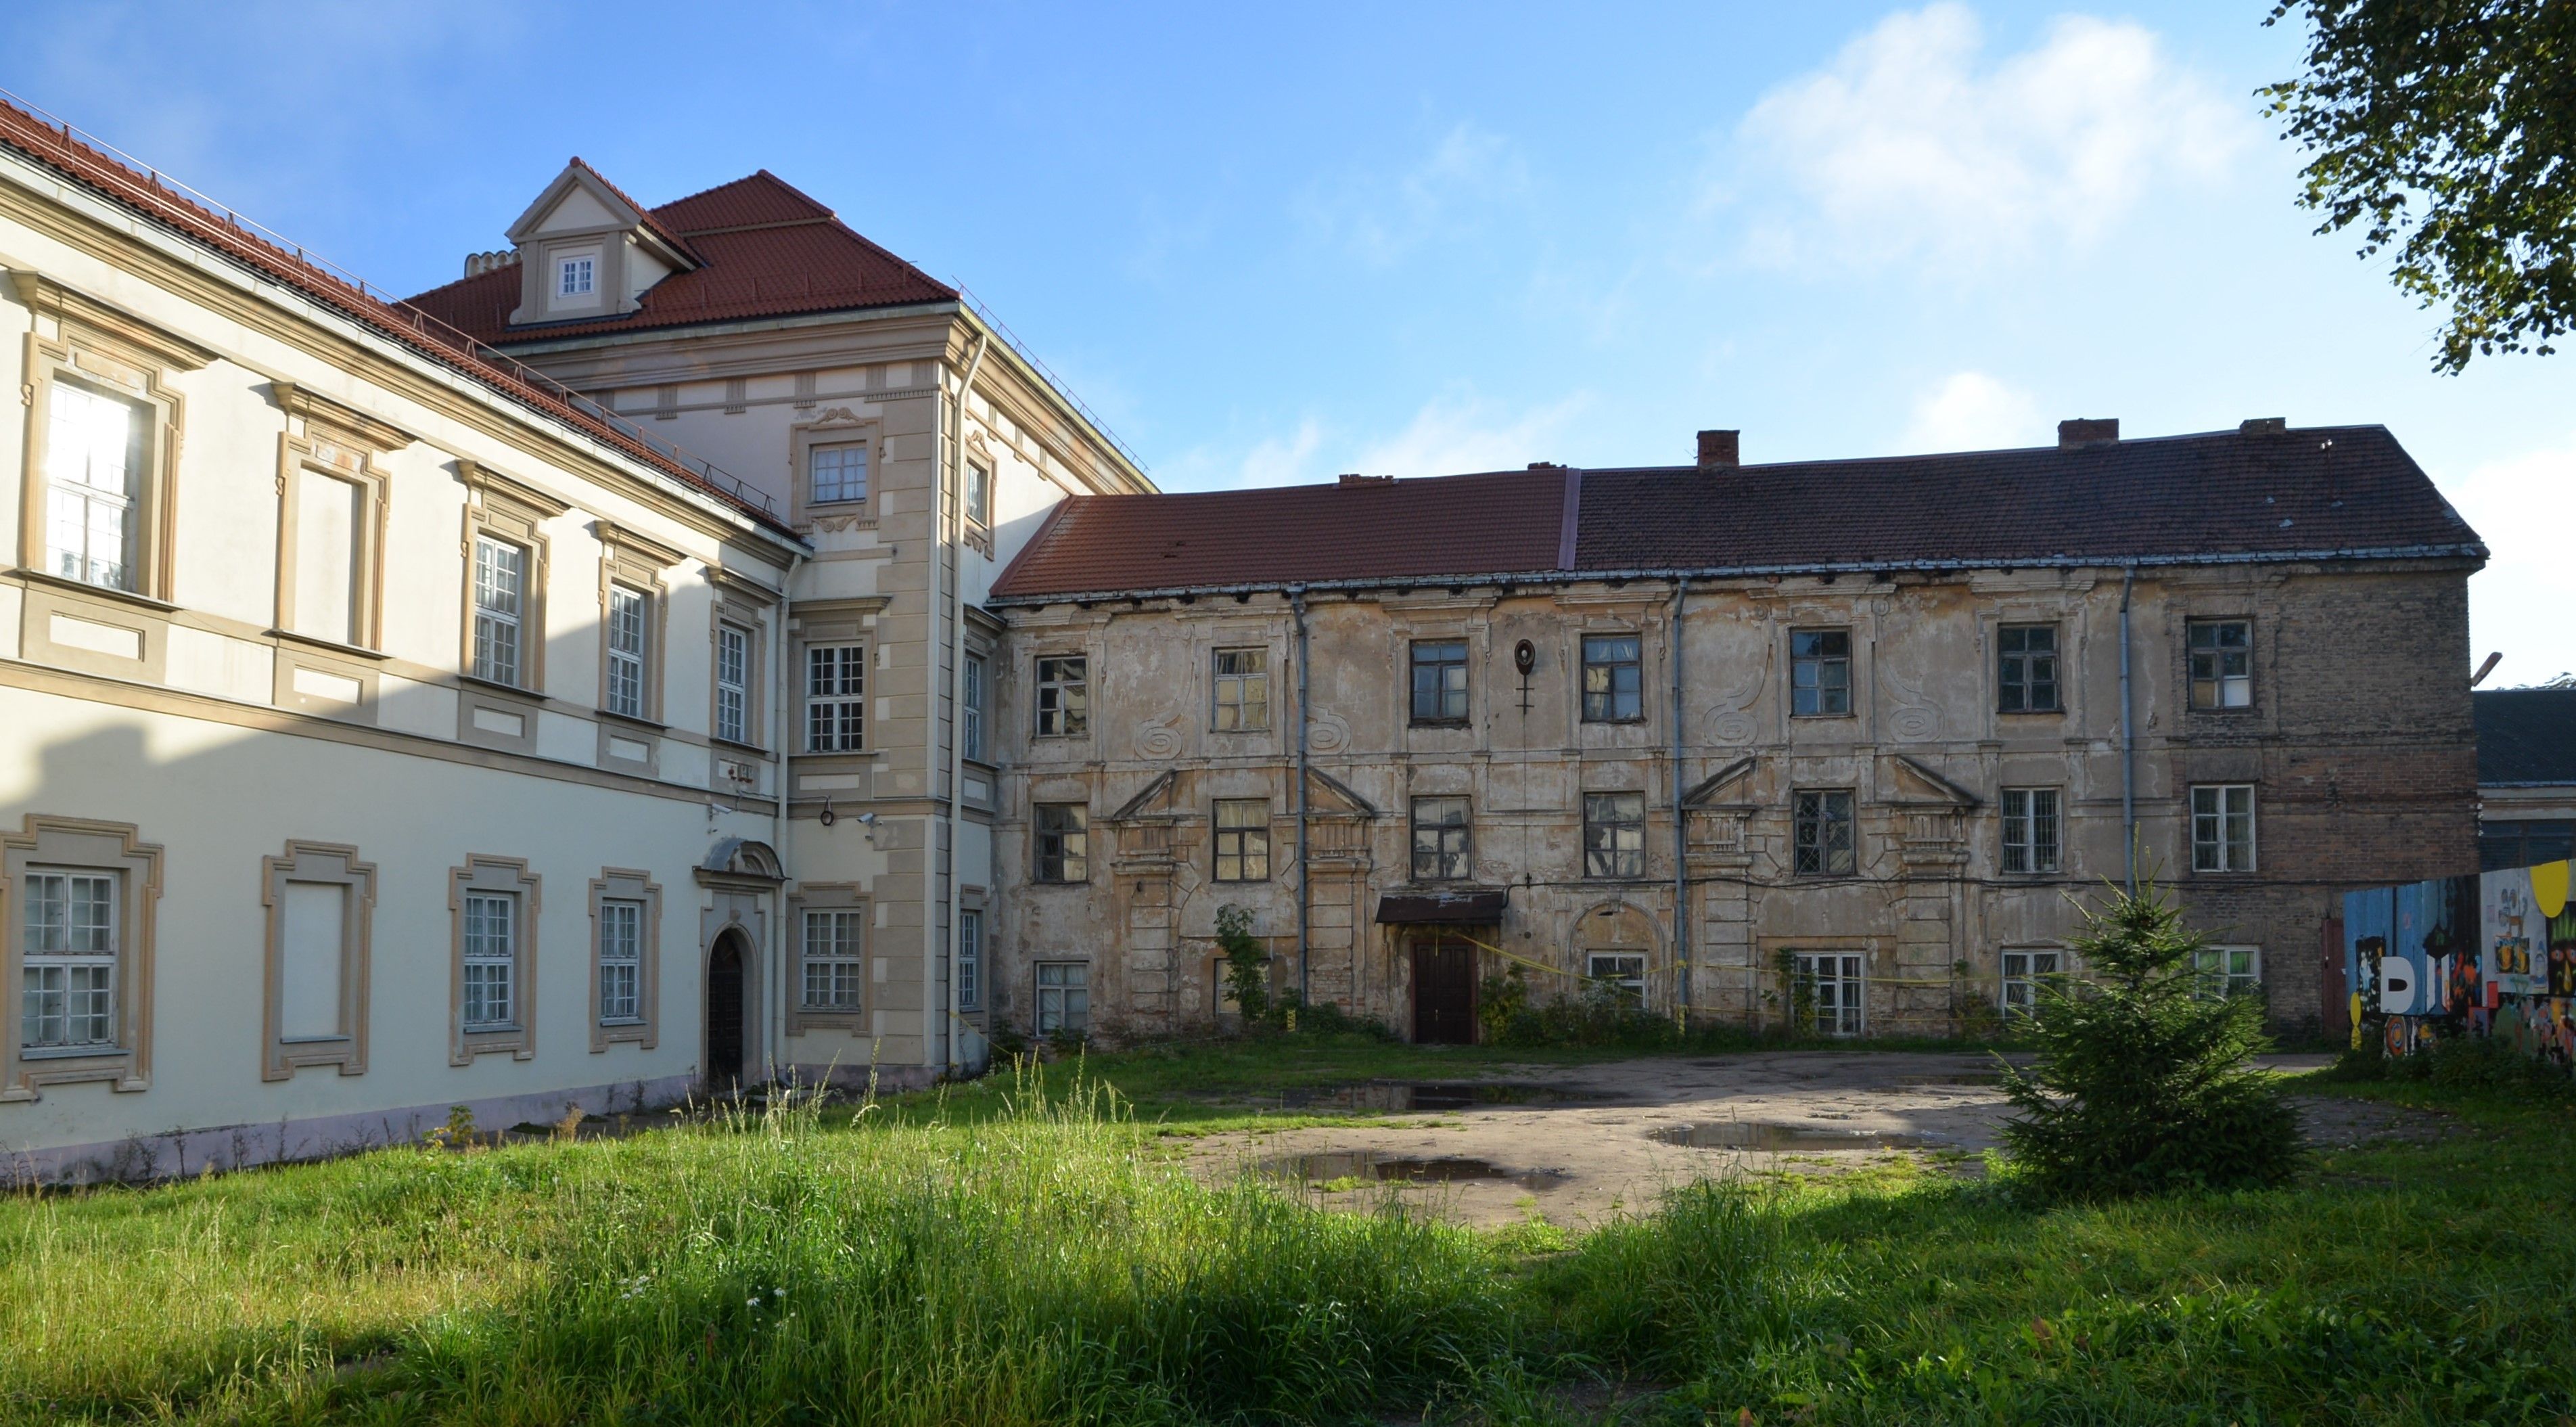 The palace of Janusz and Radziwill in Lukiszki in Vilnius